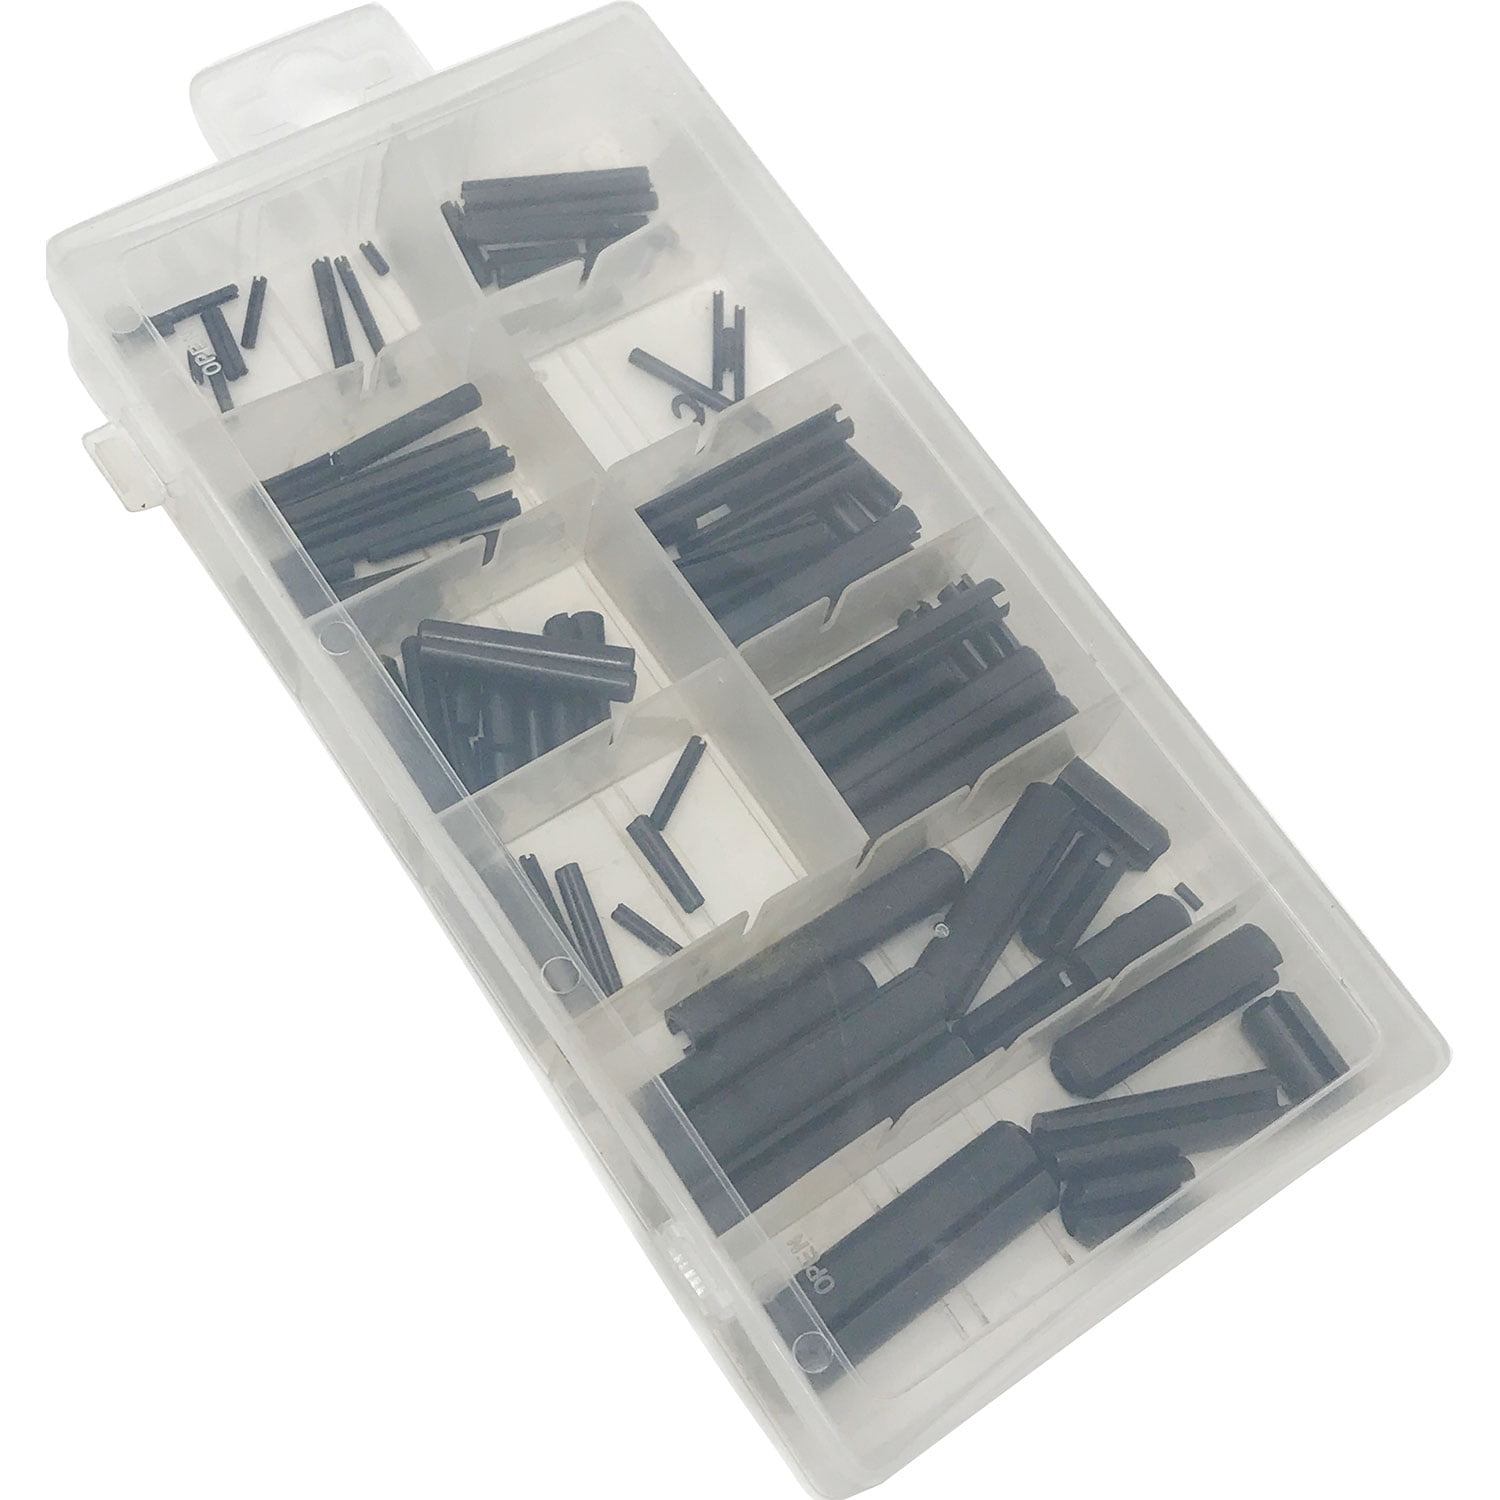 4 for $6.96 each! 120pc SAE INCH ROLL PIN SLOTTED DOWEL VARIETY ASSORTMENT KIT 